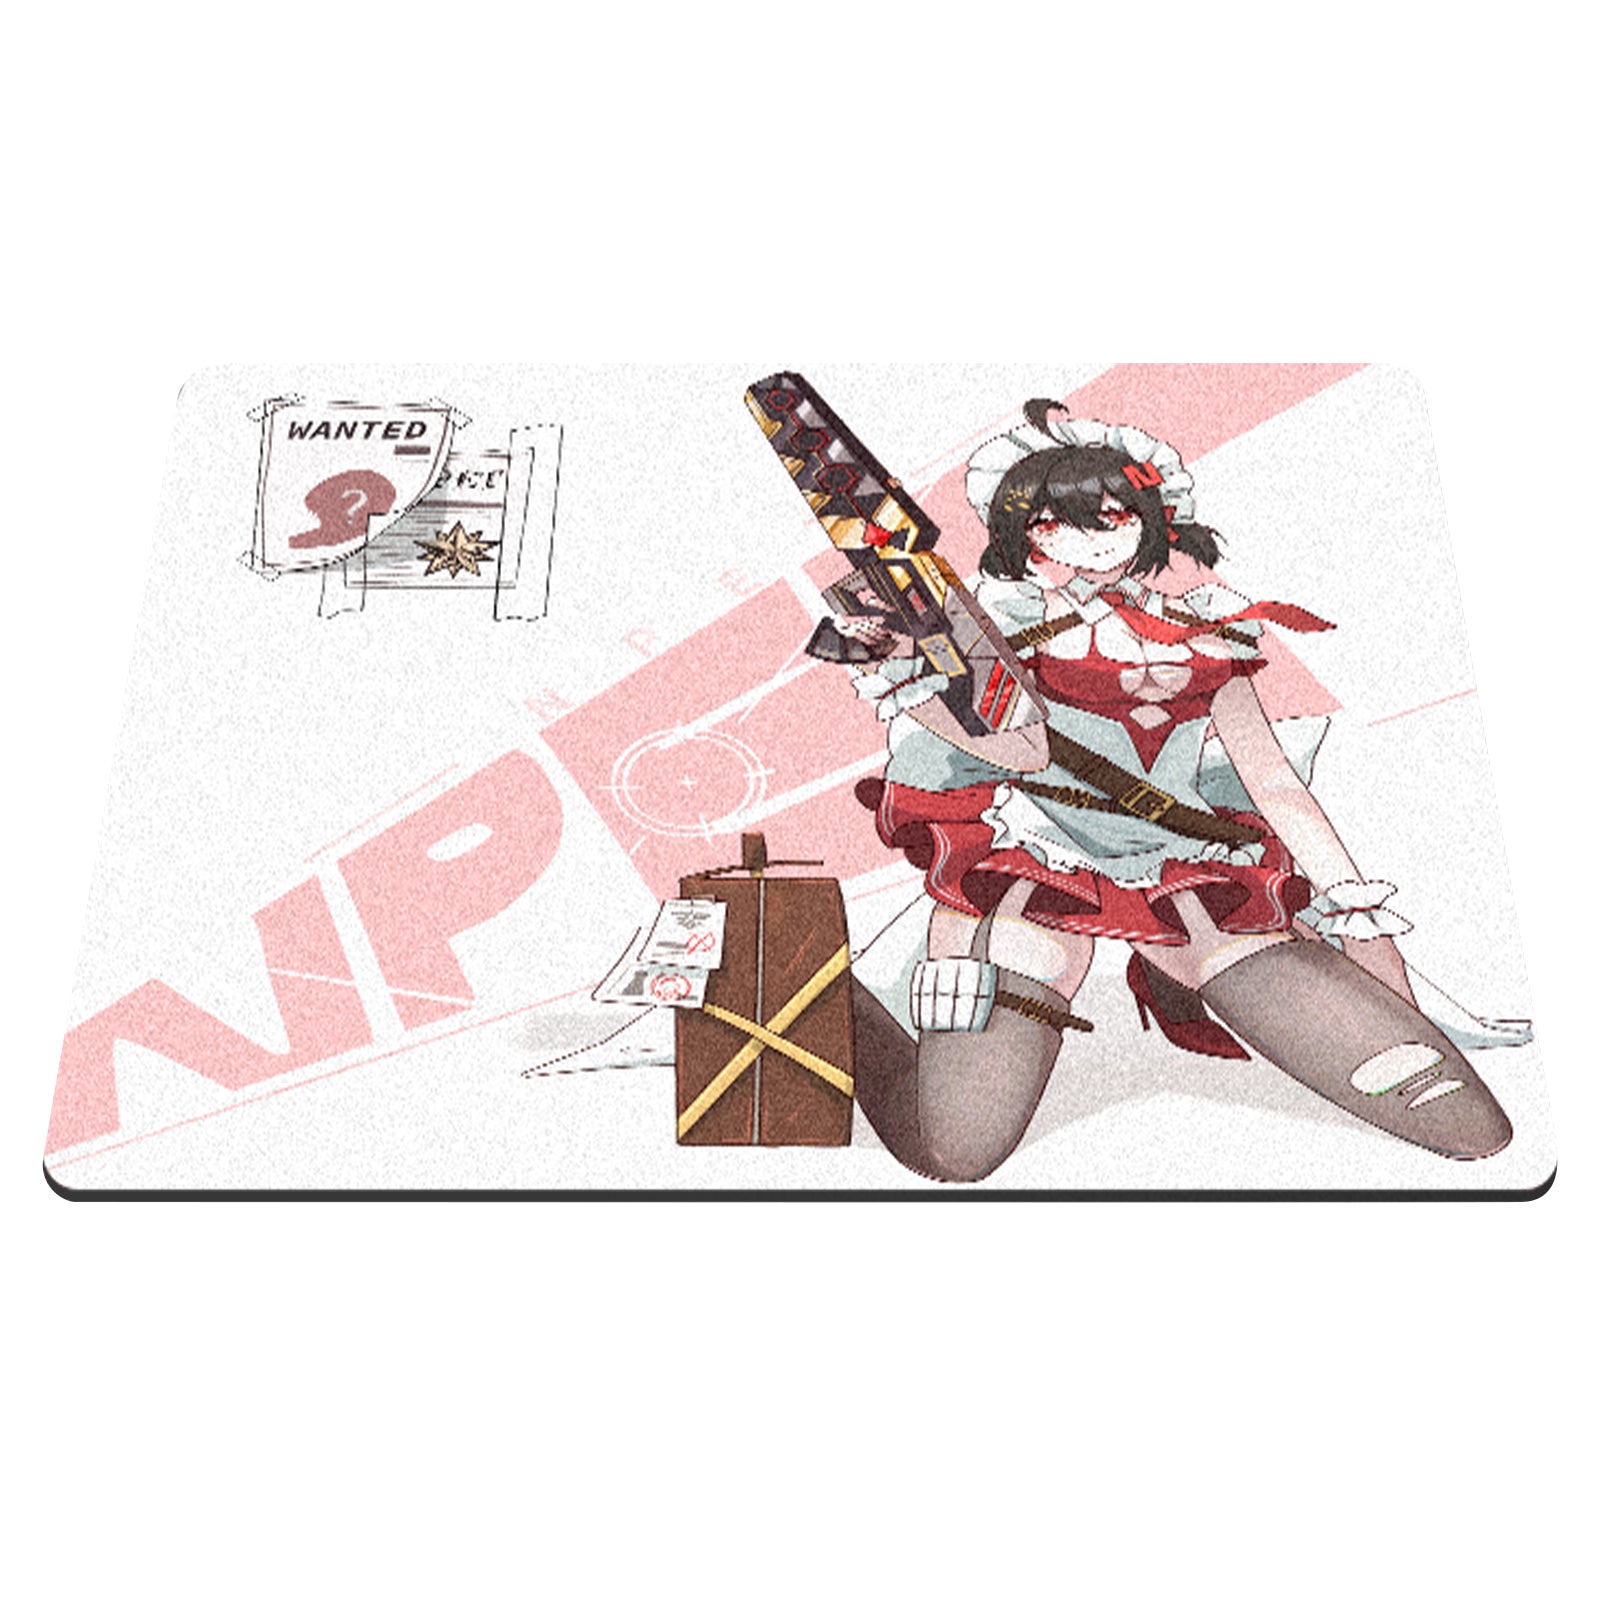 NPET SPEEDM Gaming Mousepad - Resin Surface Hard Gaming Mouse pad,Balanced Control & Speed, No Smell Waterproof Mouse Mat for Esports Gamers [Hard/Fast] White-Okihime, Medium